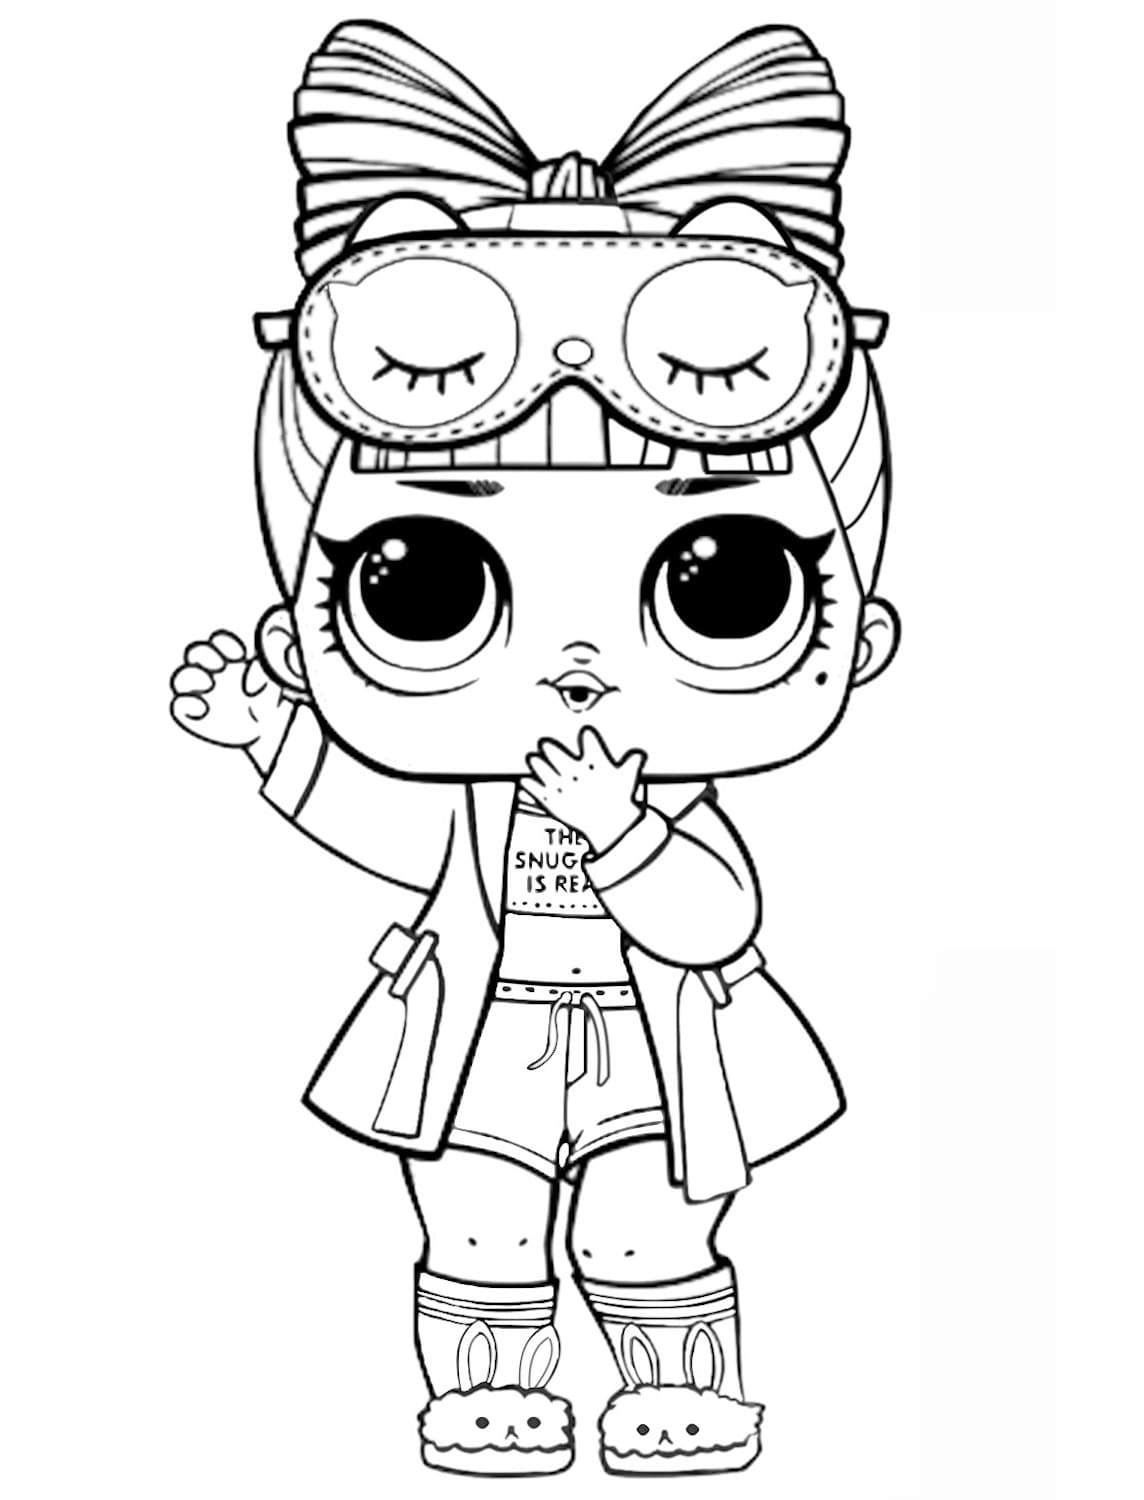 Snuggle Babe LOL coloring page